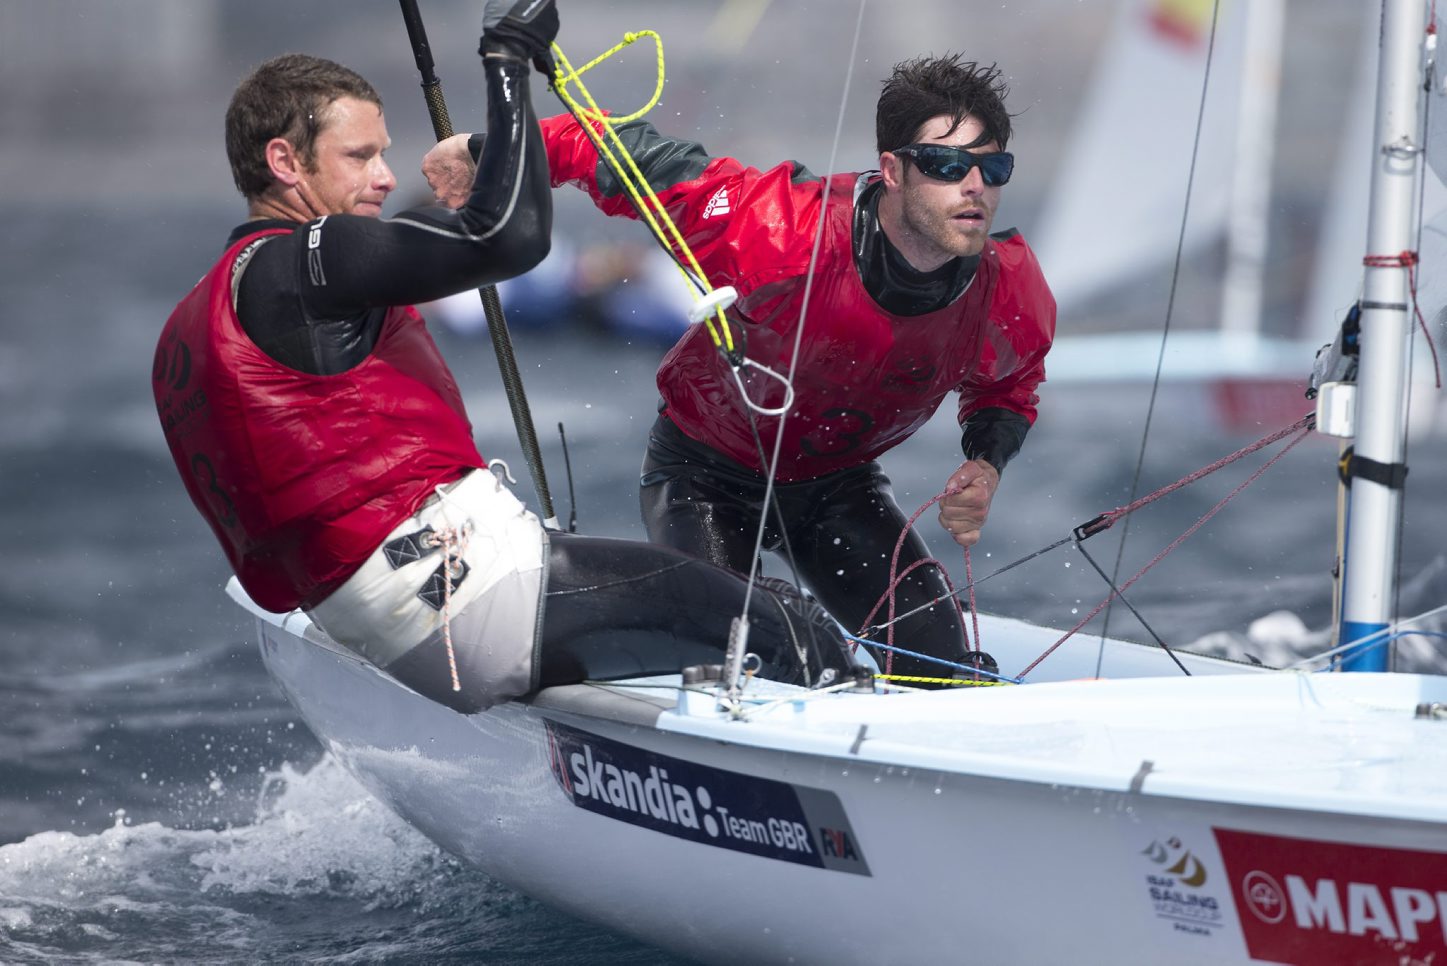 Luke (right) sailing with new partner Joe Glanfield on their Road to Rio 2016